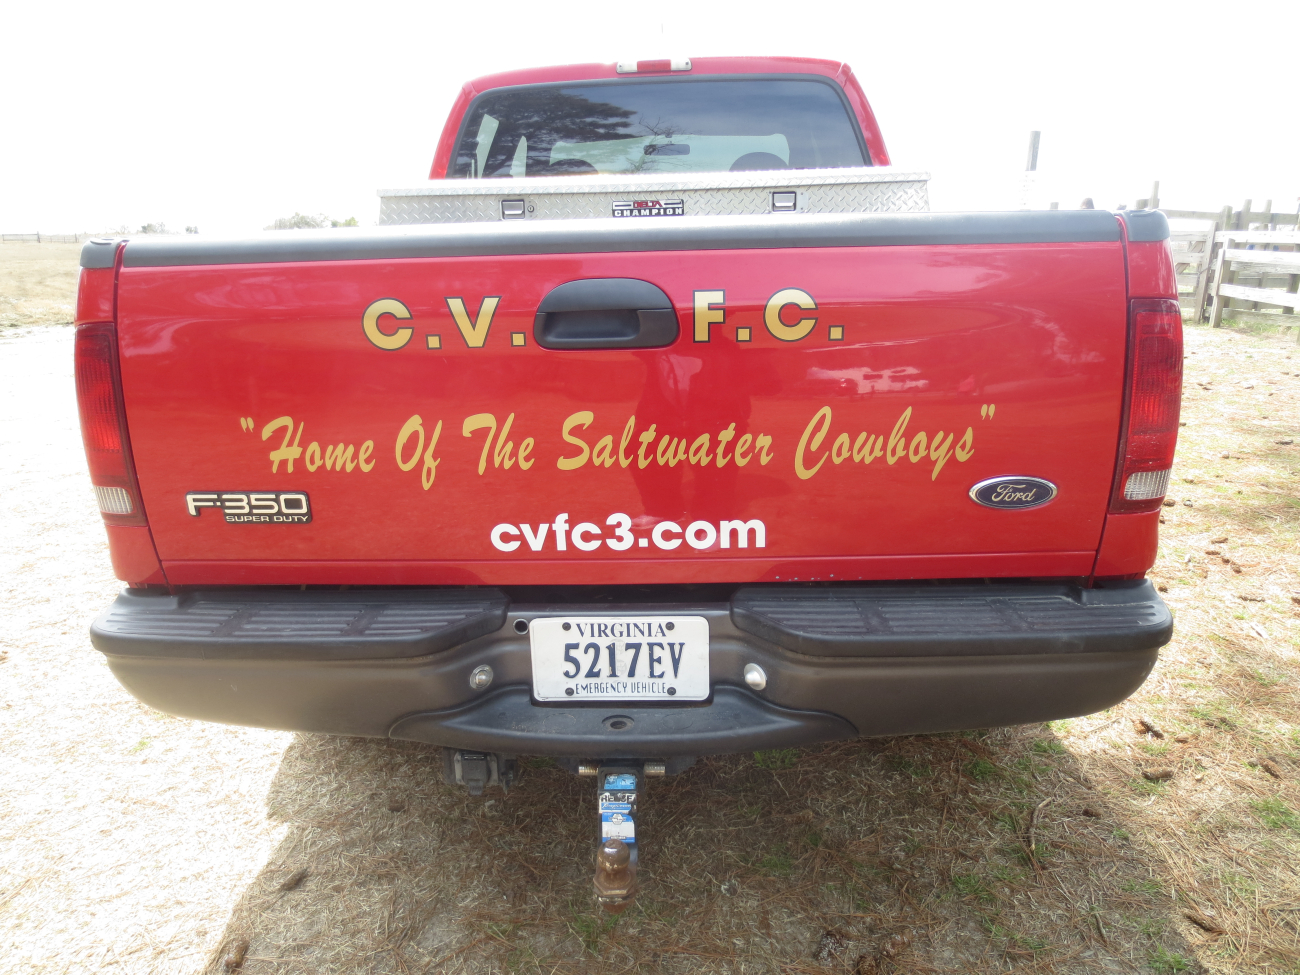 Chincoteague volunteer fire department truck with the proud words Home of theSaltwater Cowboys